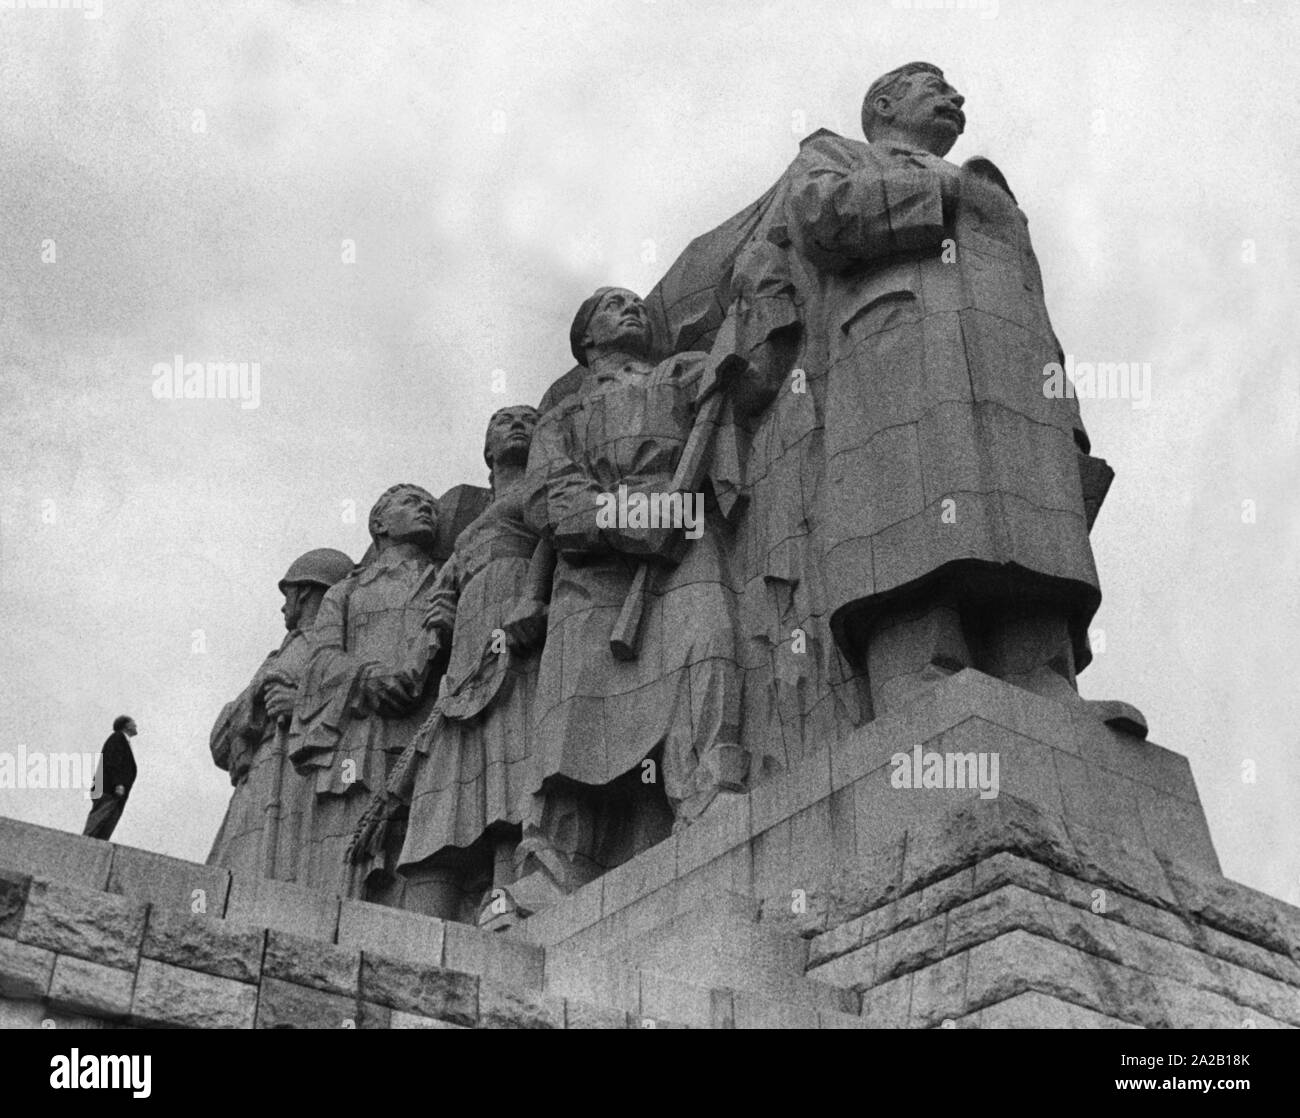 The Stalin Memorial in Prague was inaugurated in 1955 and reopened in 1962. It was the world's largest depiction of Joseph Stalin. Stock Photo